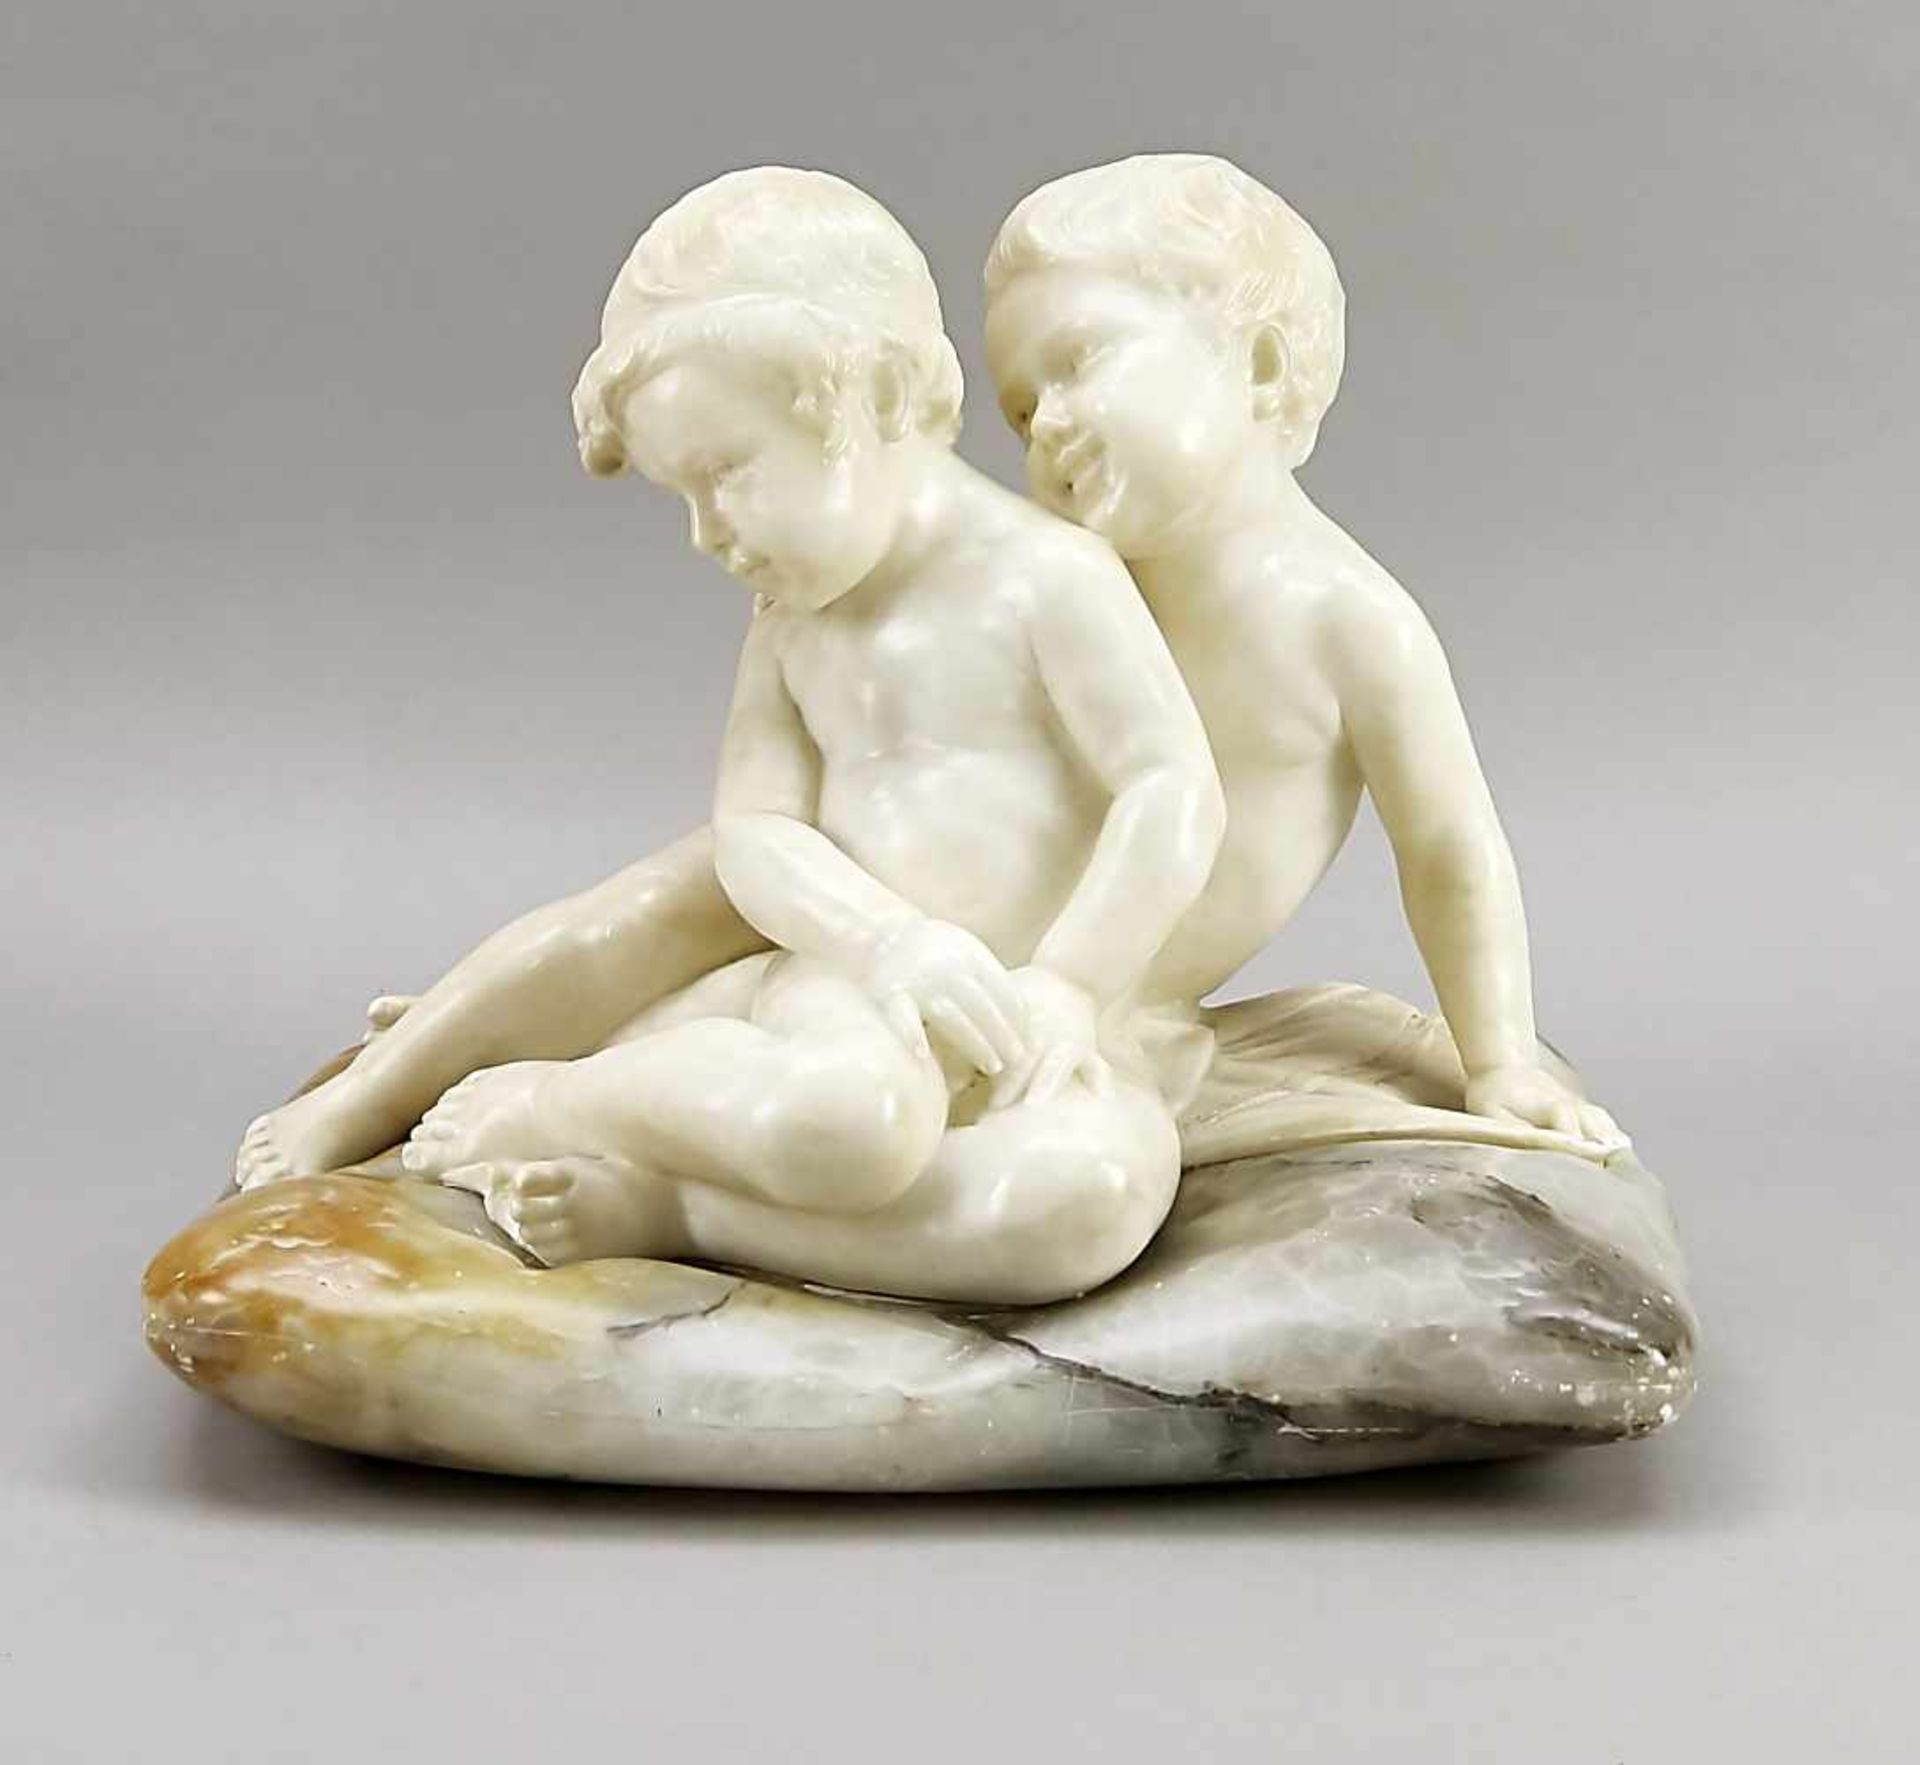 Sylvain Kinsburger (1855-1935), French sculptor, large alabaster sculpture of two toddlers